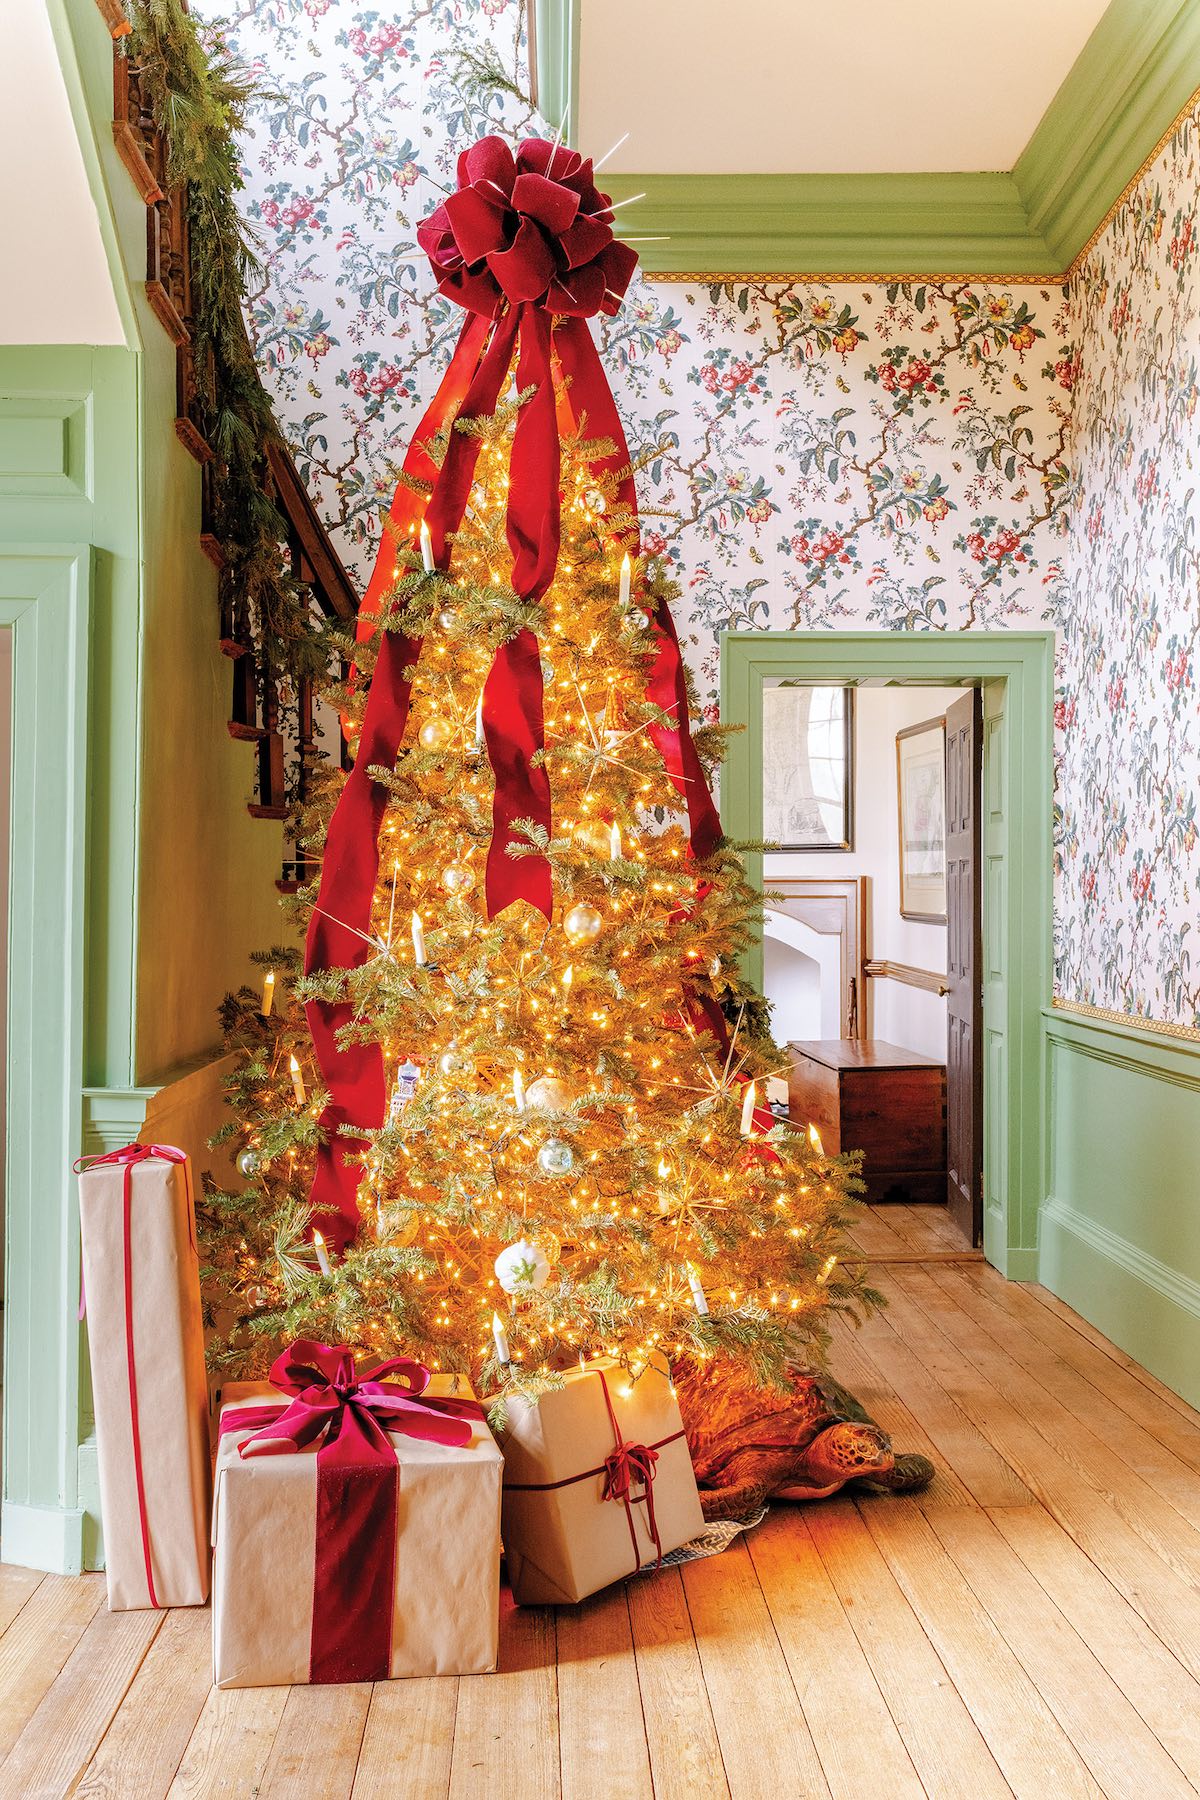 A brightly lit Christmas tree stands in a wallpapered hallway.